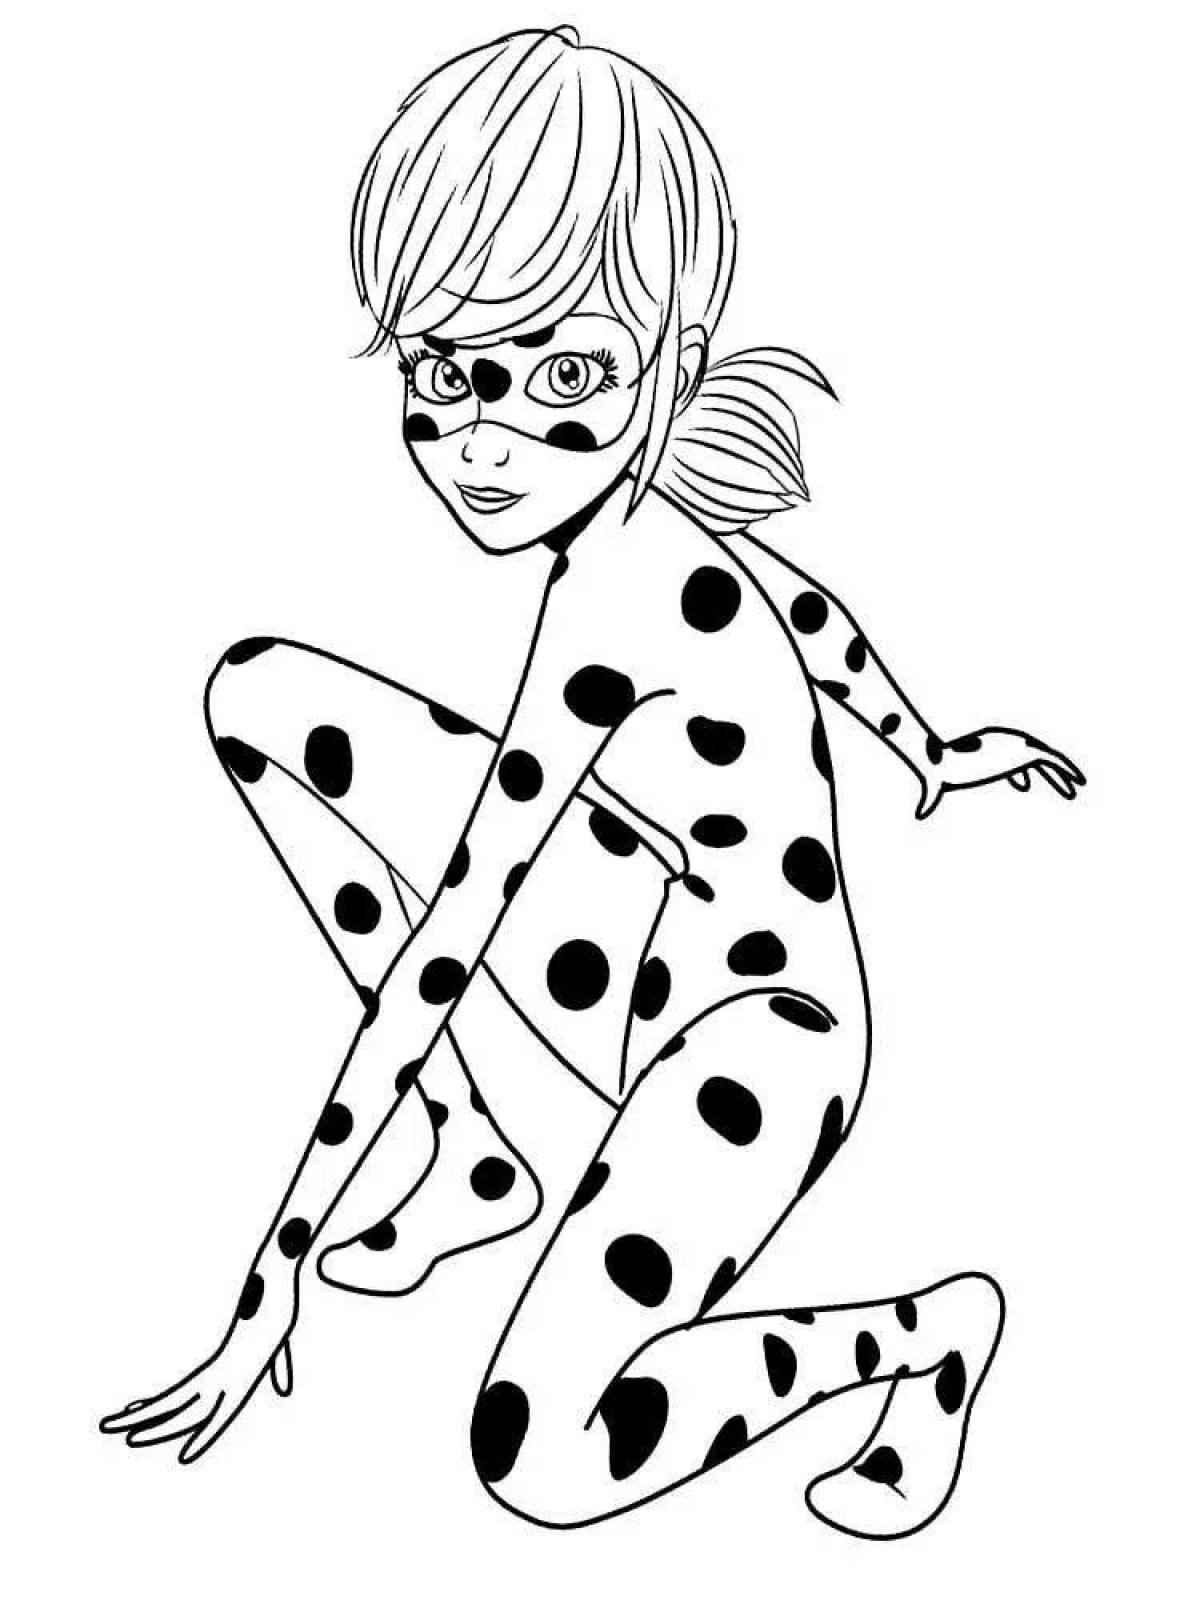 Miraculous ladybug and super cat coloring book